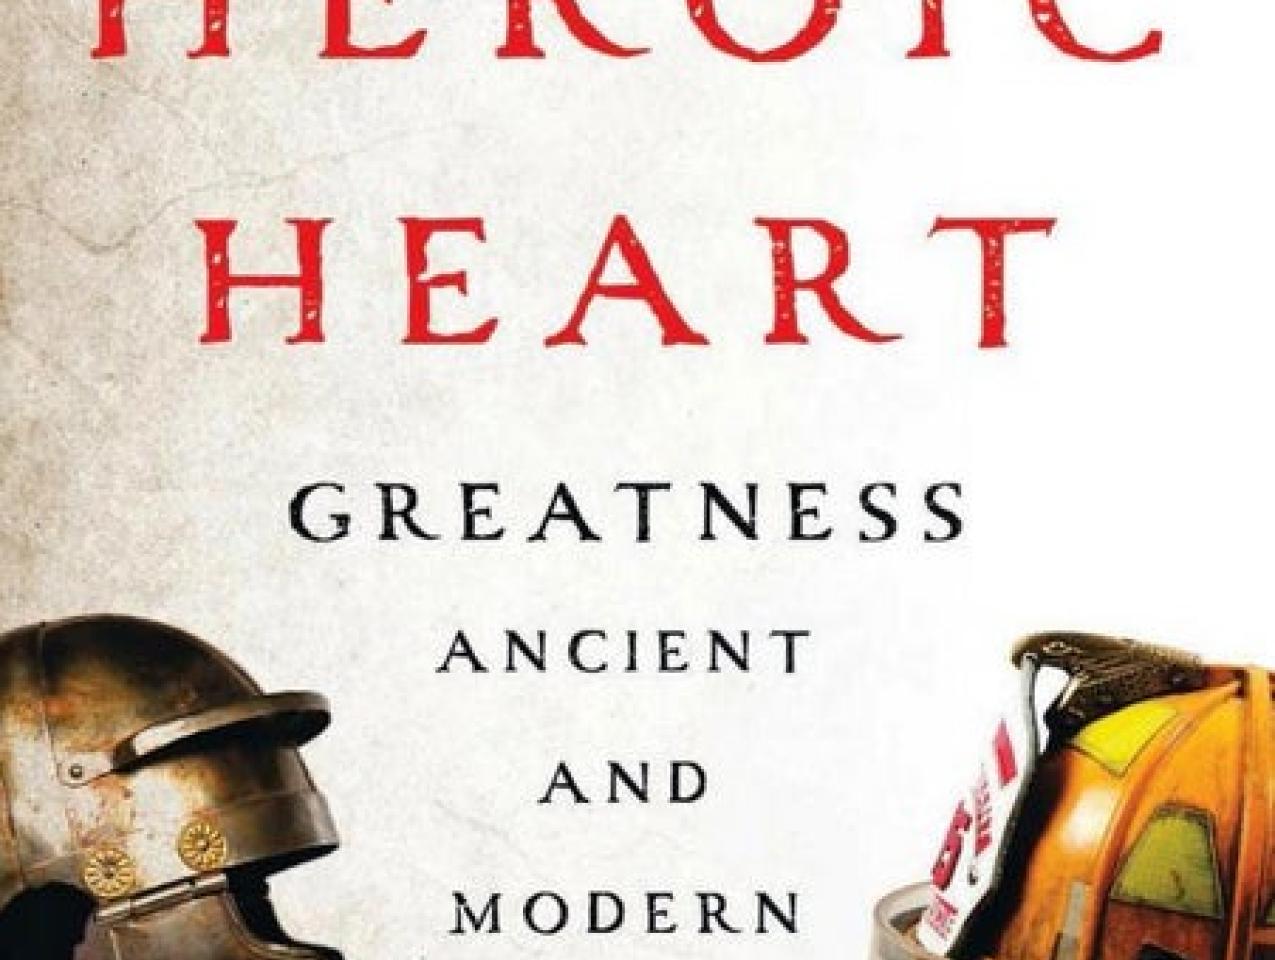 Image for The Heroic Heart Book Launch